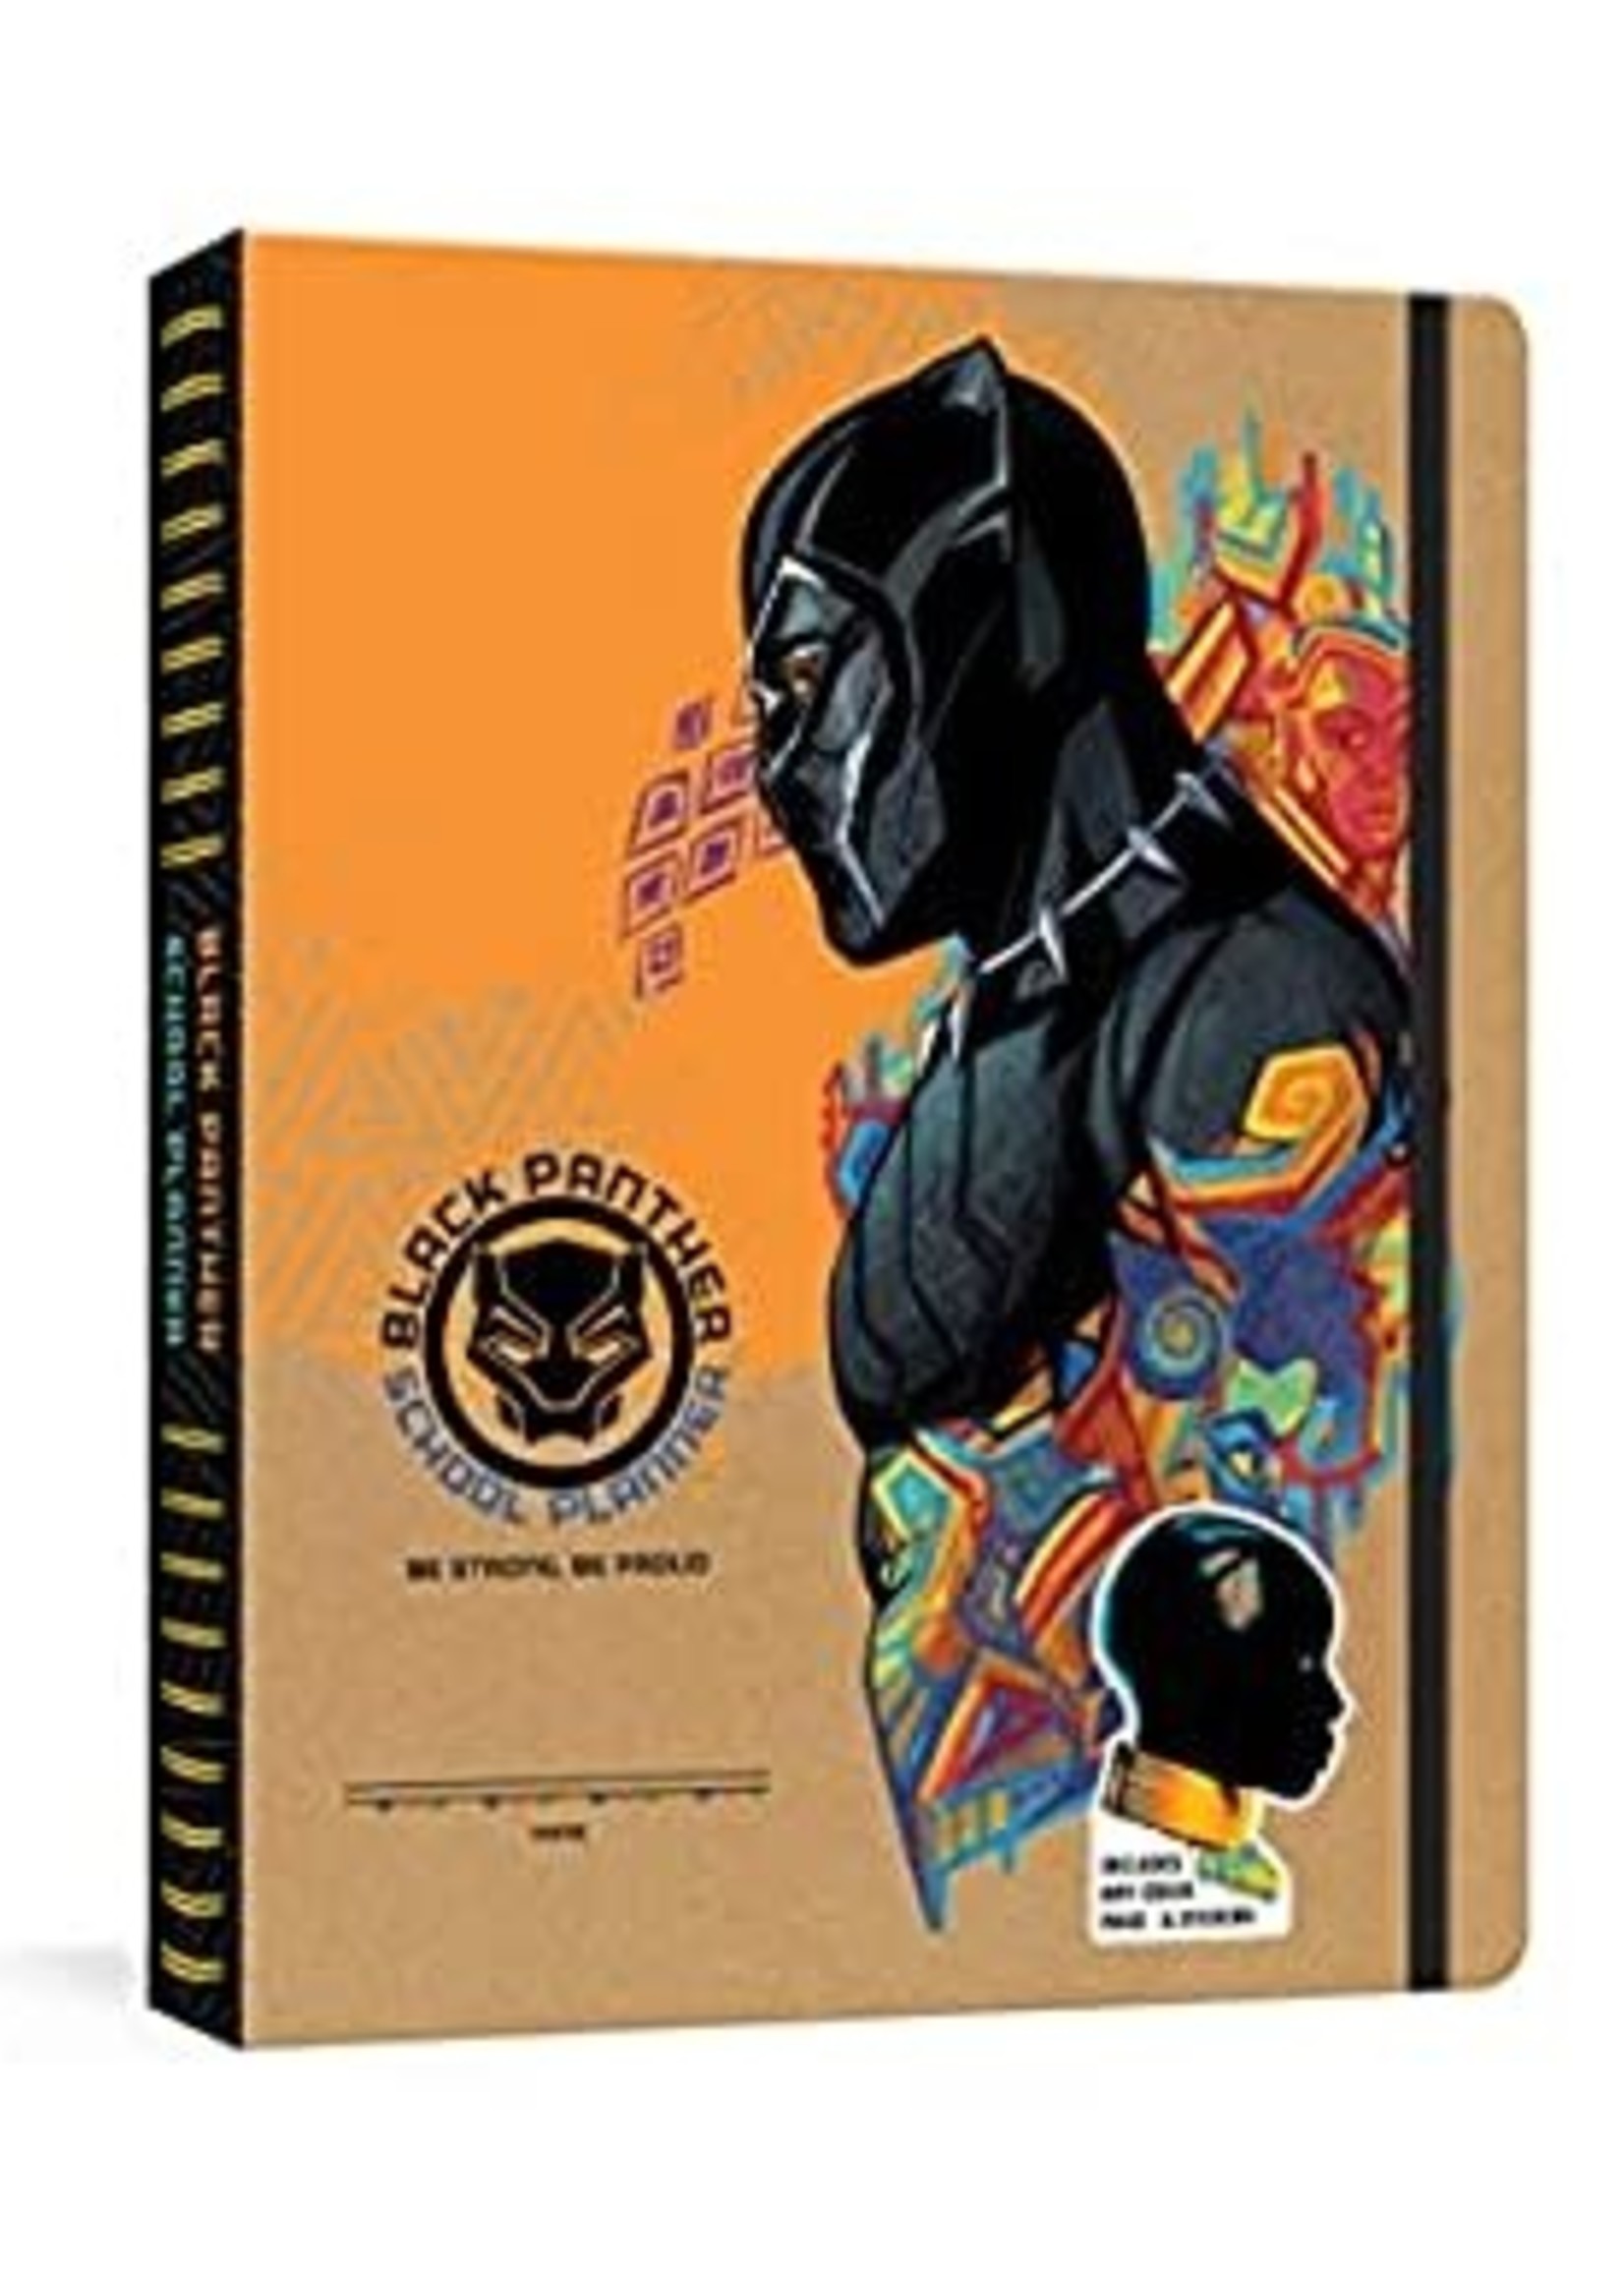 Black Panther School Planner: Be Strong, Be Proud: A Week-at-a-Glance Kid's Planner with Stickers (Marvel School Planner) by Marvel Comics